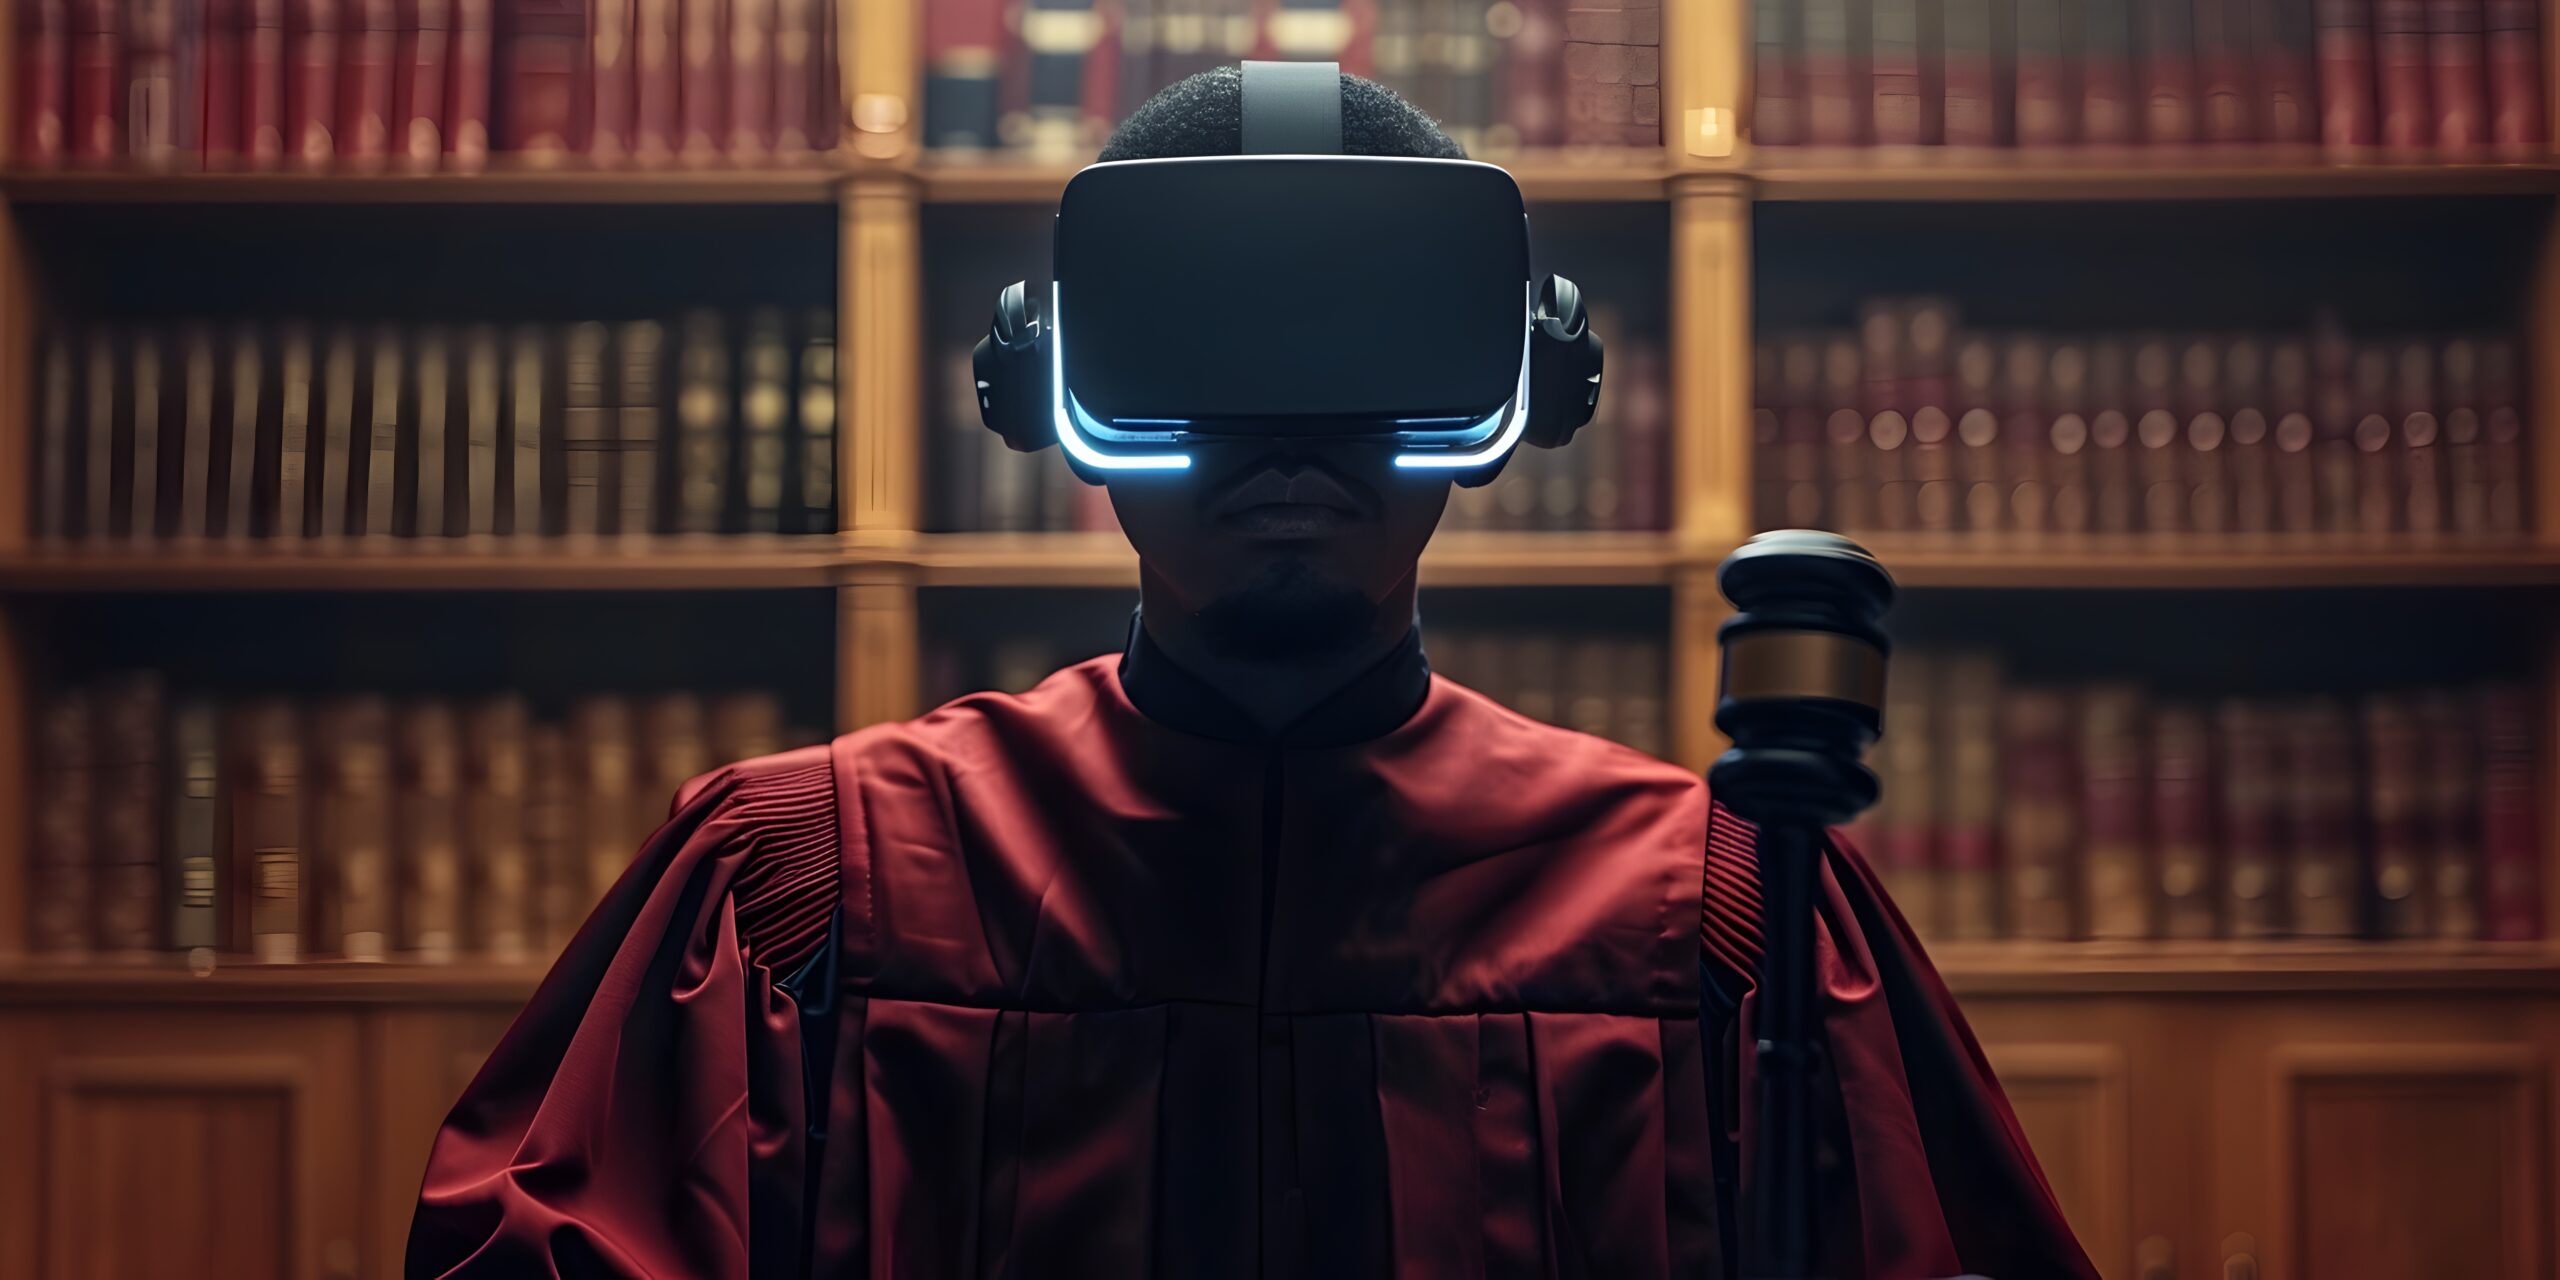 The image depicts a futuristic judge character wearing a traditional robe and presiding over virtual reality court proceedings The judge appears to be an arbiter of disputes involving digital avatars